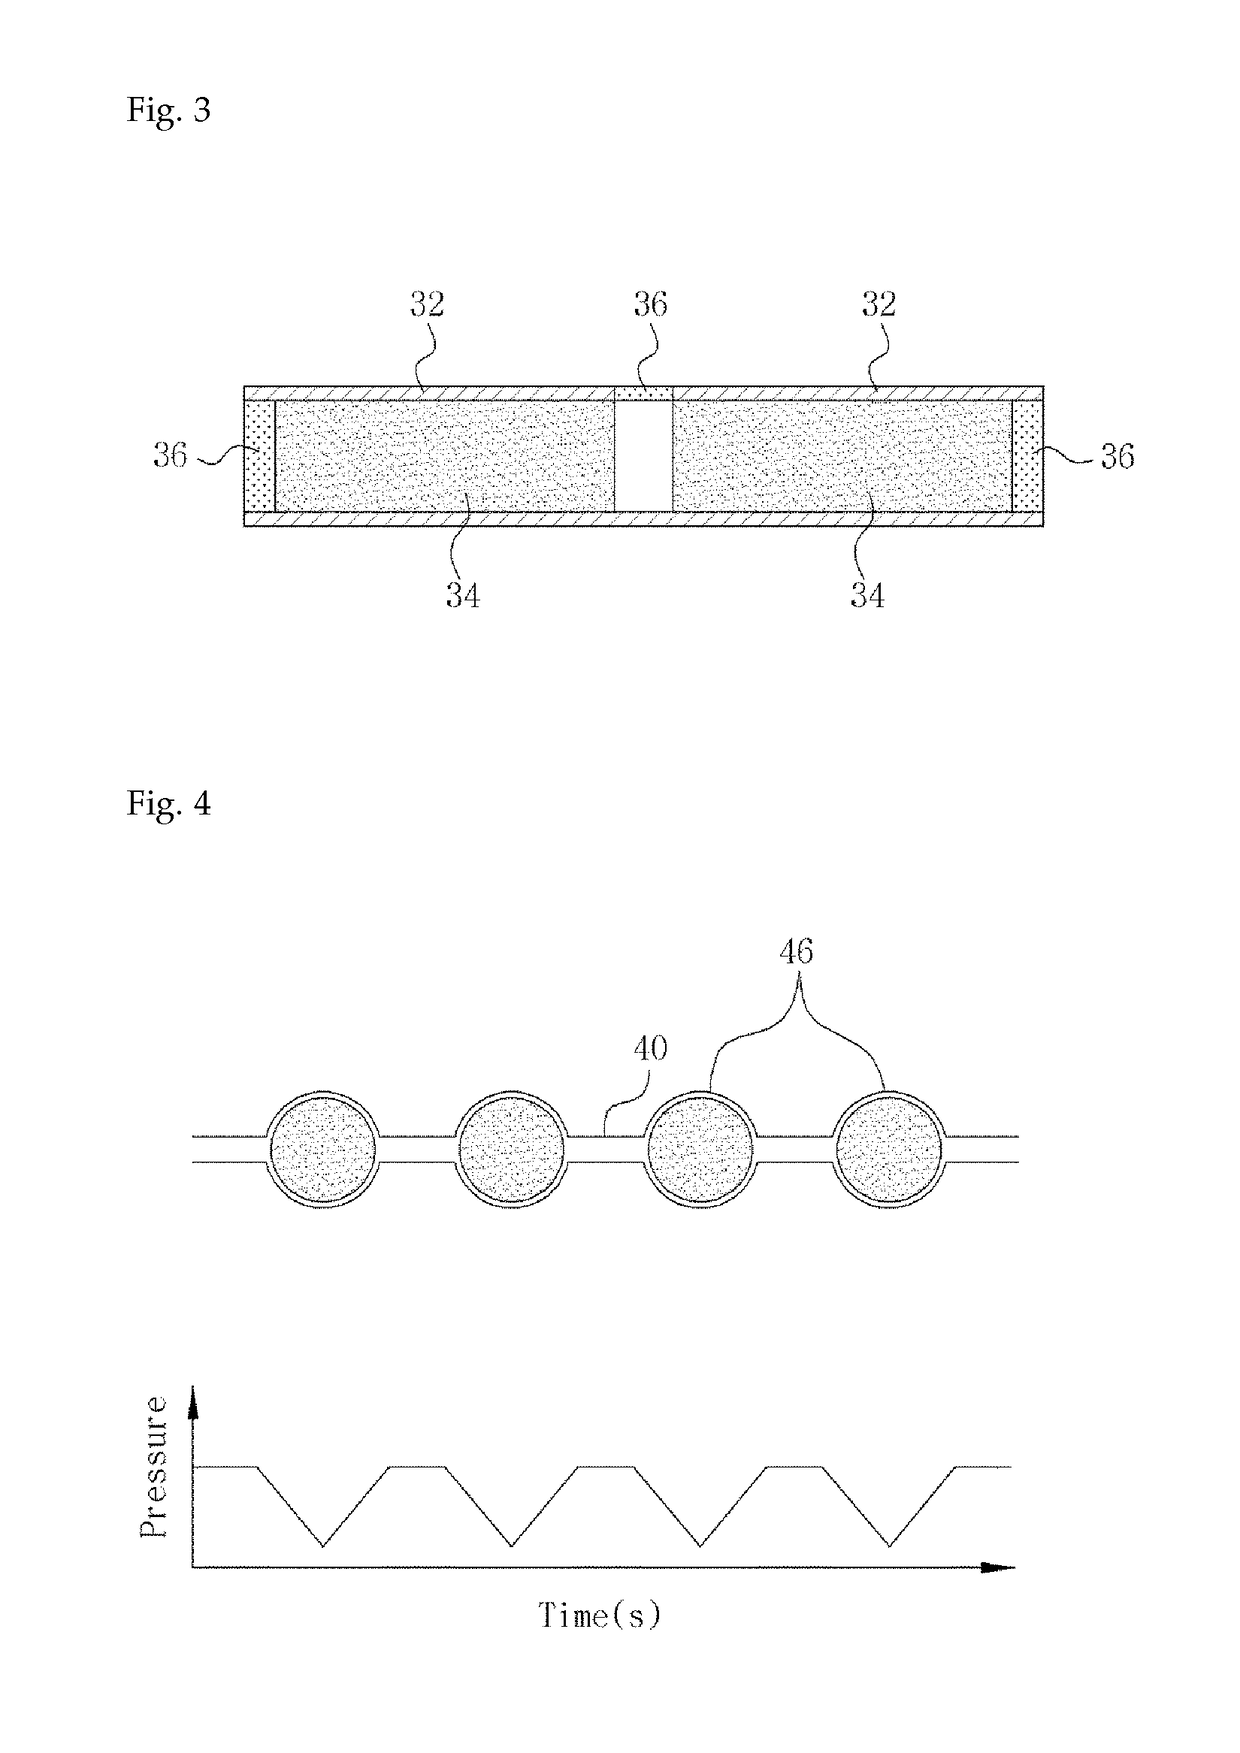 Apparatus and method for testing multi-function and drug response of centrifugal microfluidic-based platelets